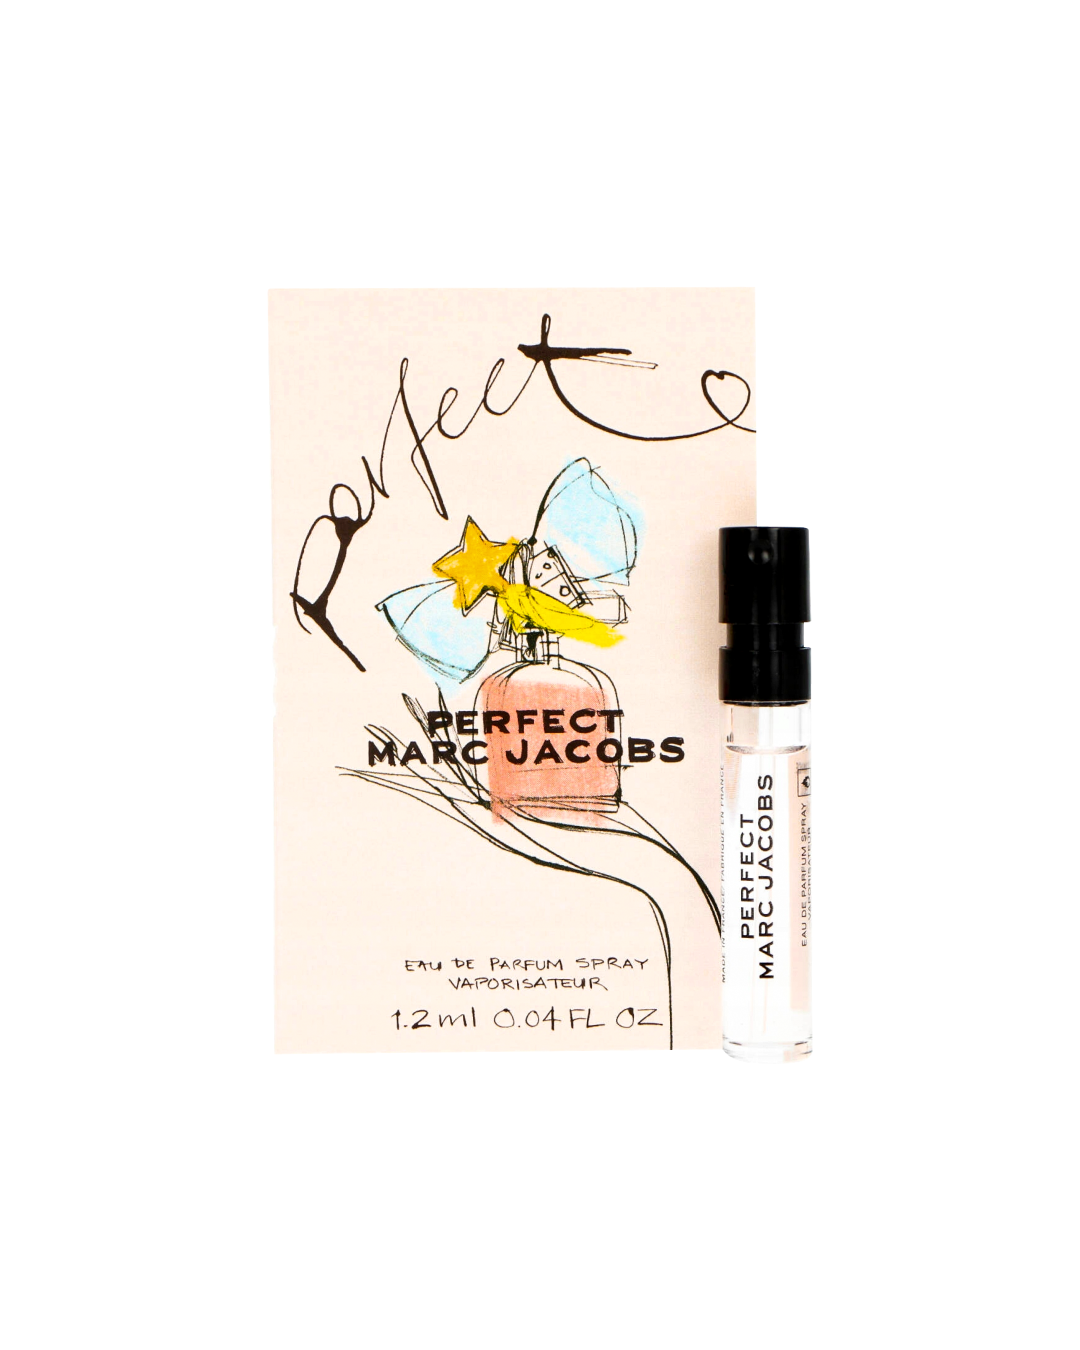 Marc Jacobs Perfect EDP Travel Vial (1.2ml) - Best Buy World Philippines